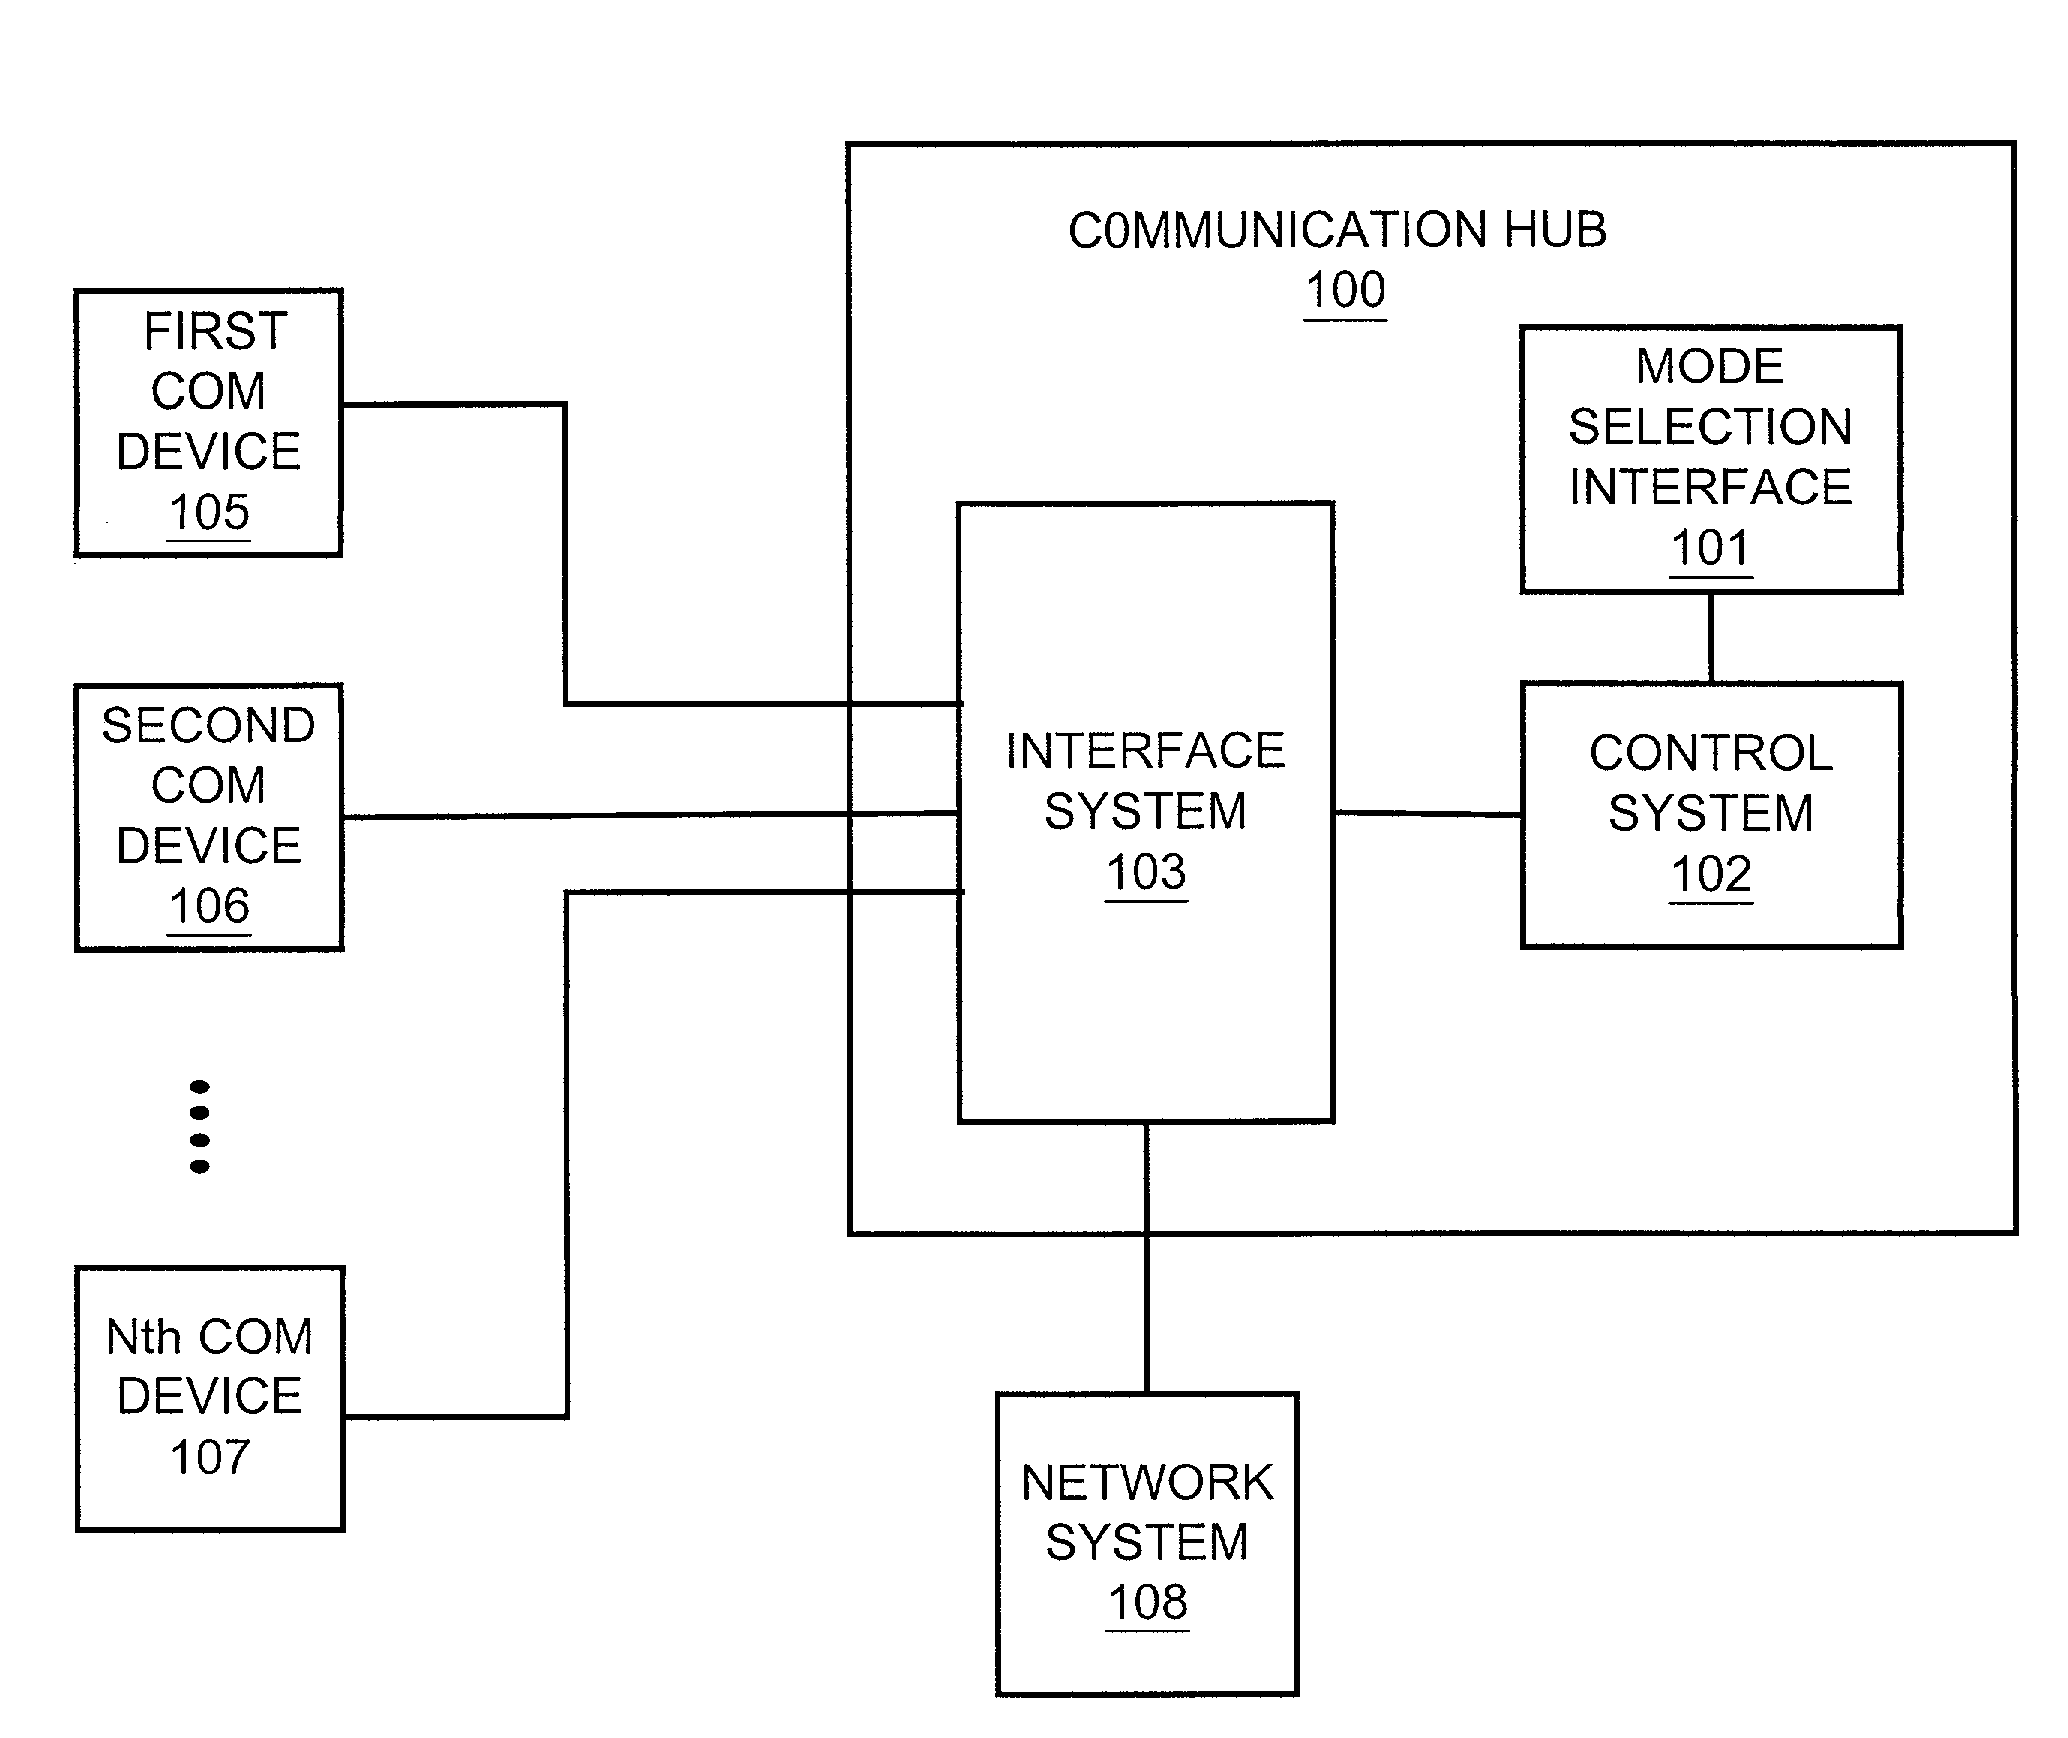 Communication hub with automatic device registration